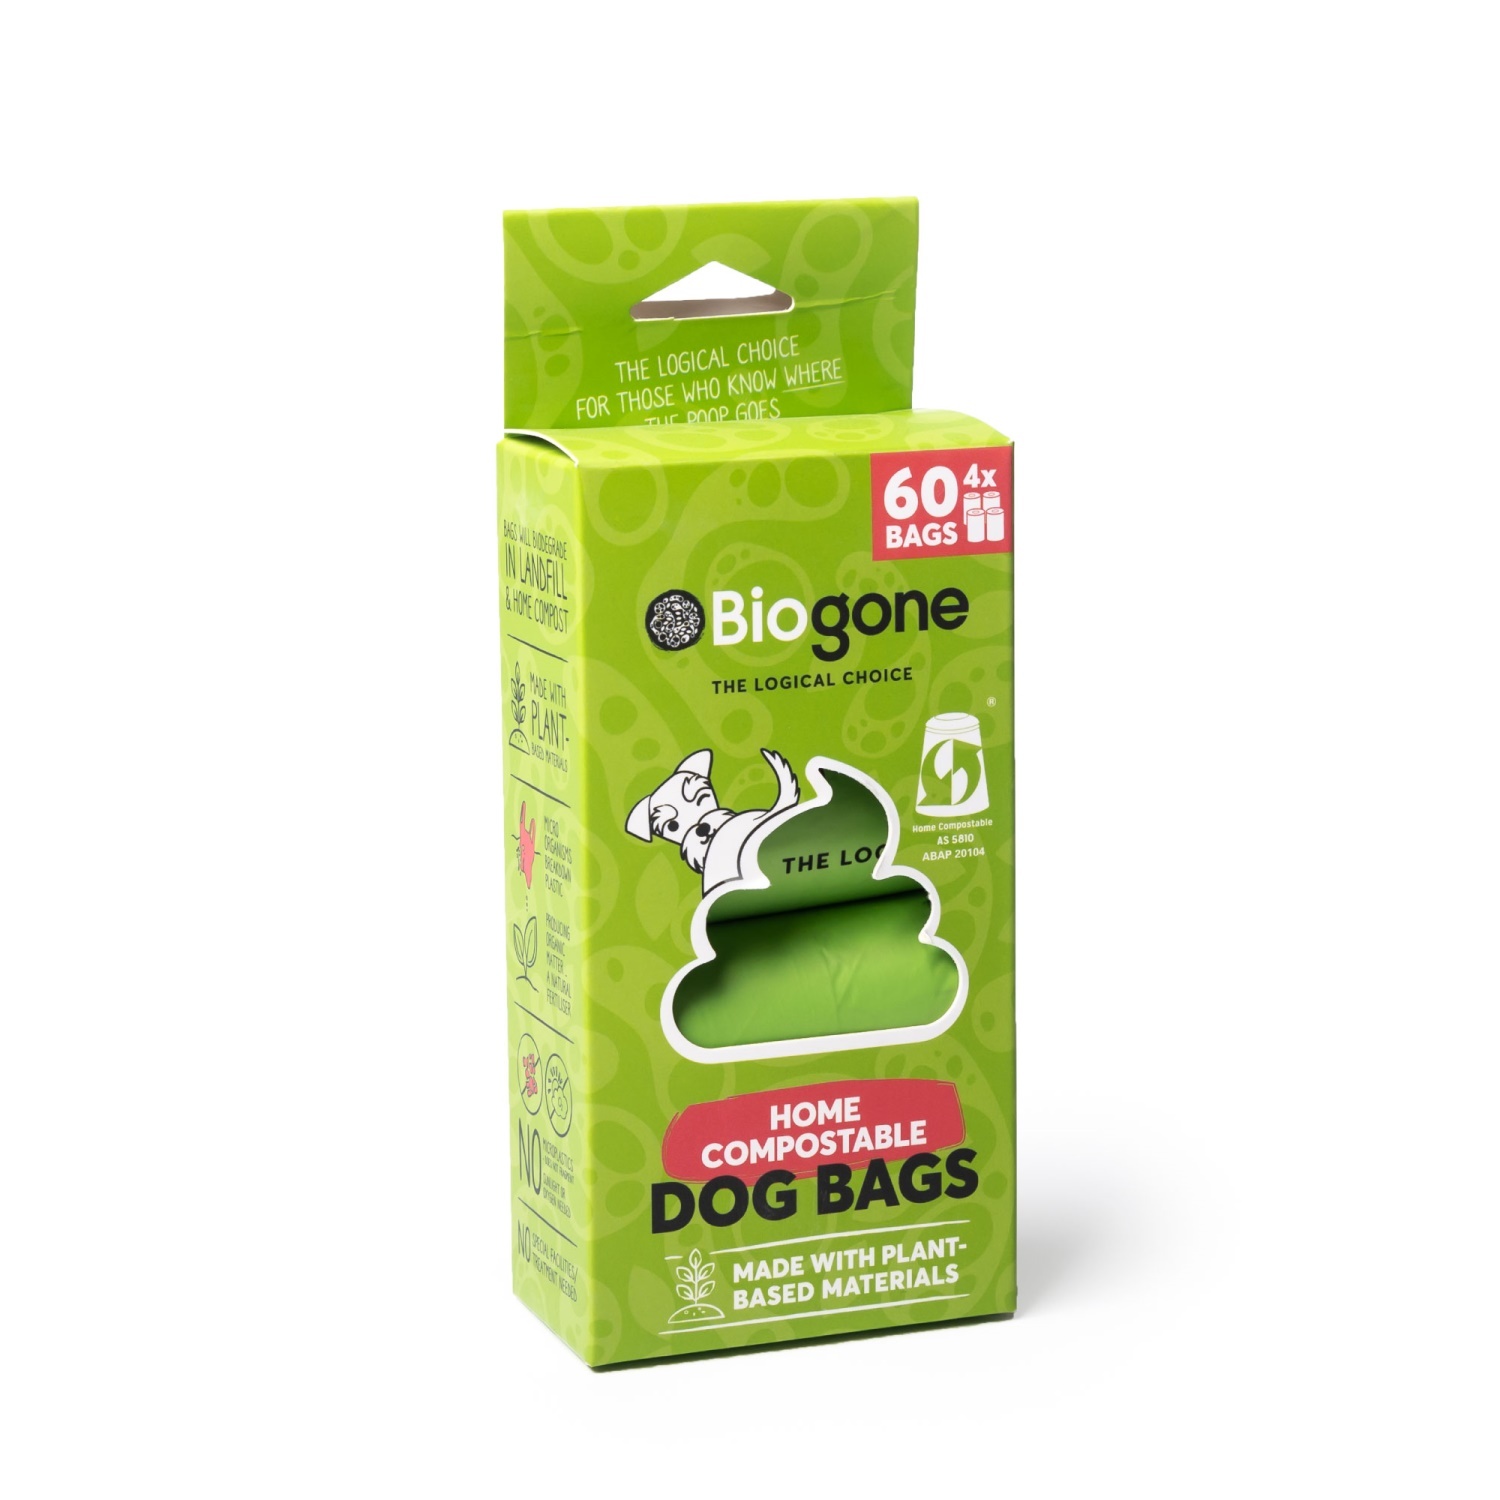 Bio-Gone Biodegradable Home Compostable Dog Waste Bags - 4 & 8 Rolls (80/120 Bags) image 0